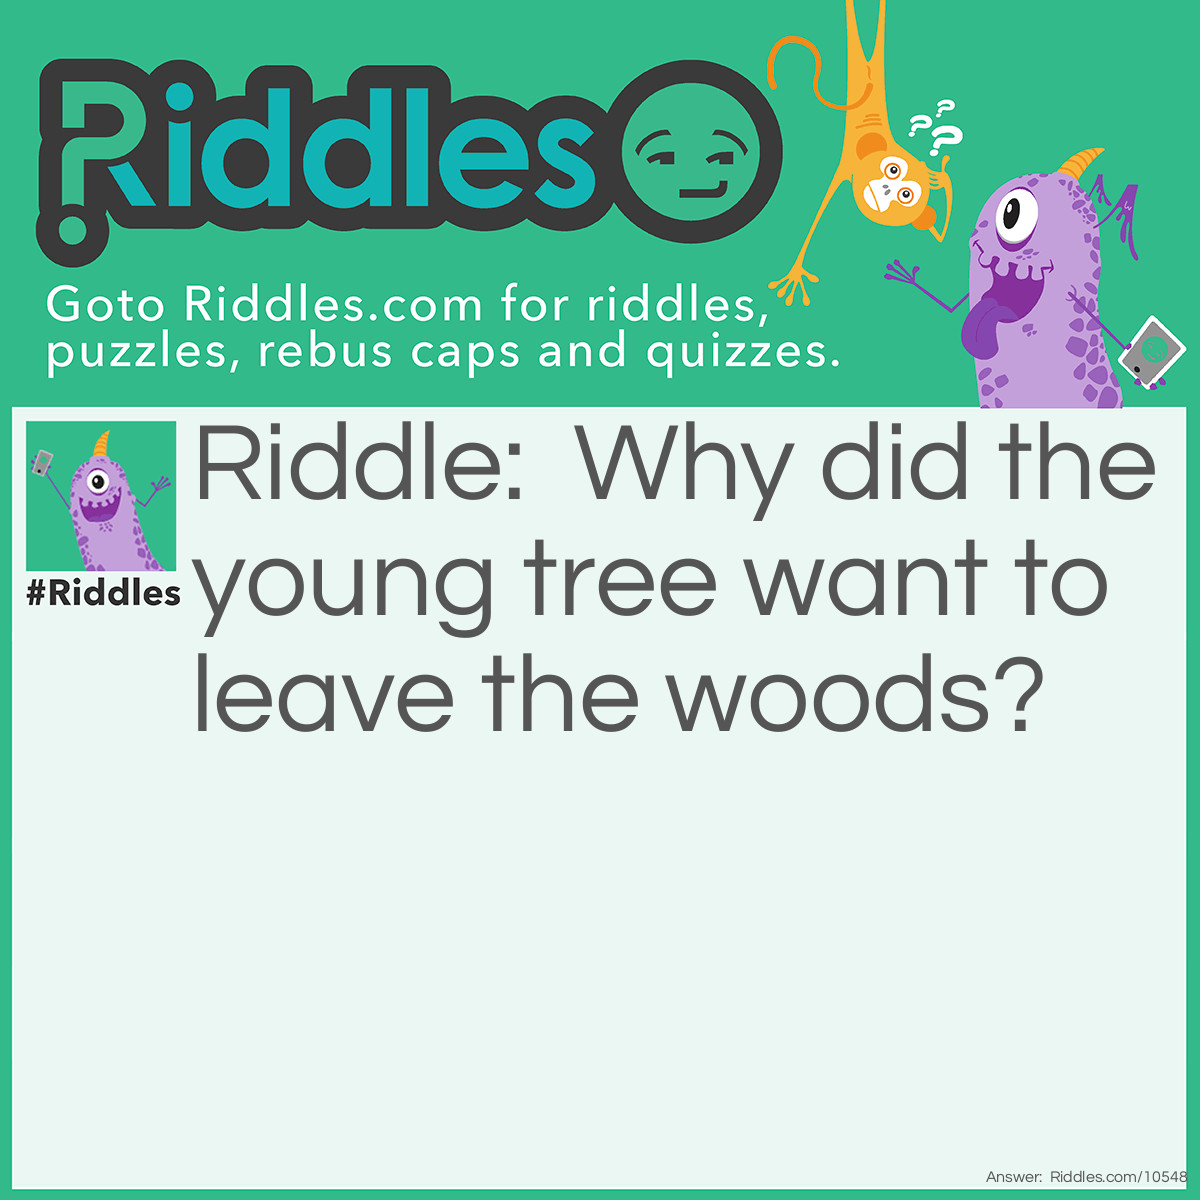 Riddle: Why did the young tree want to leave the woods? Answer: It wanted to branch out on its own.